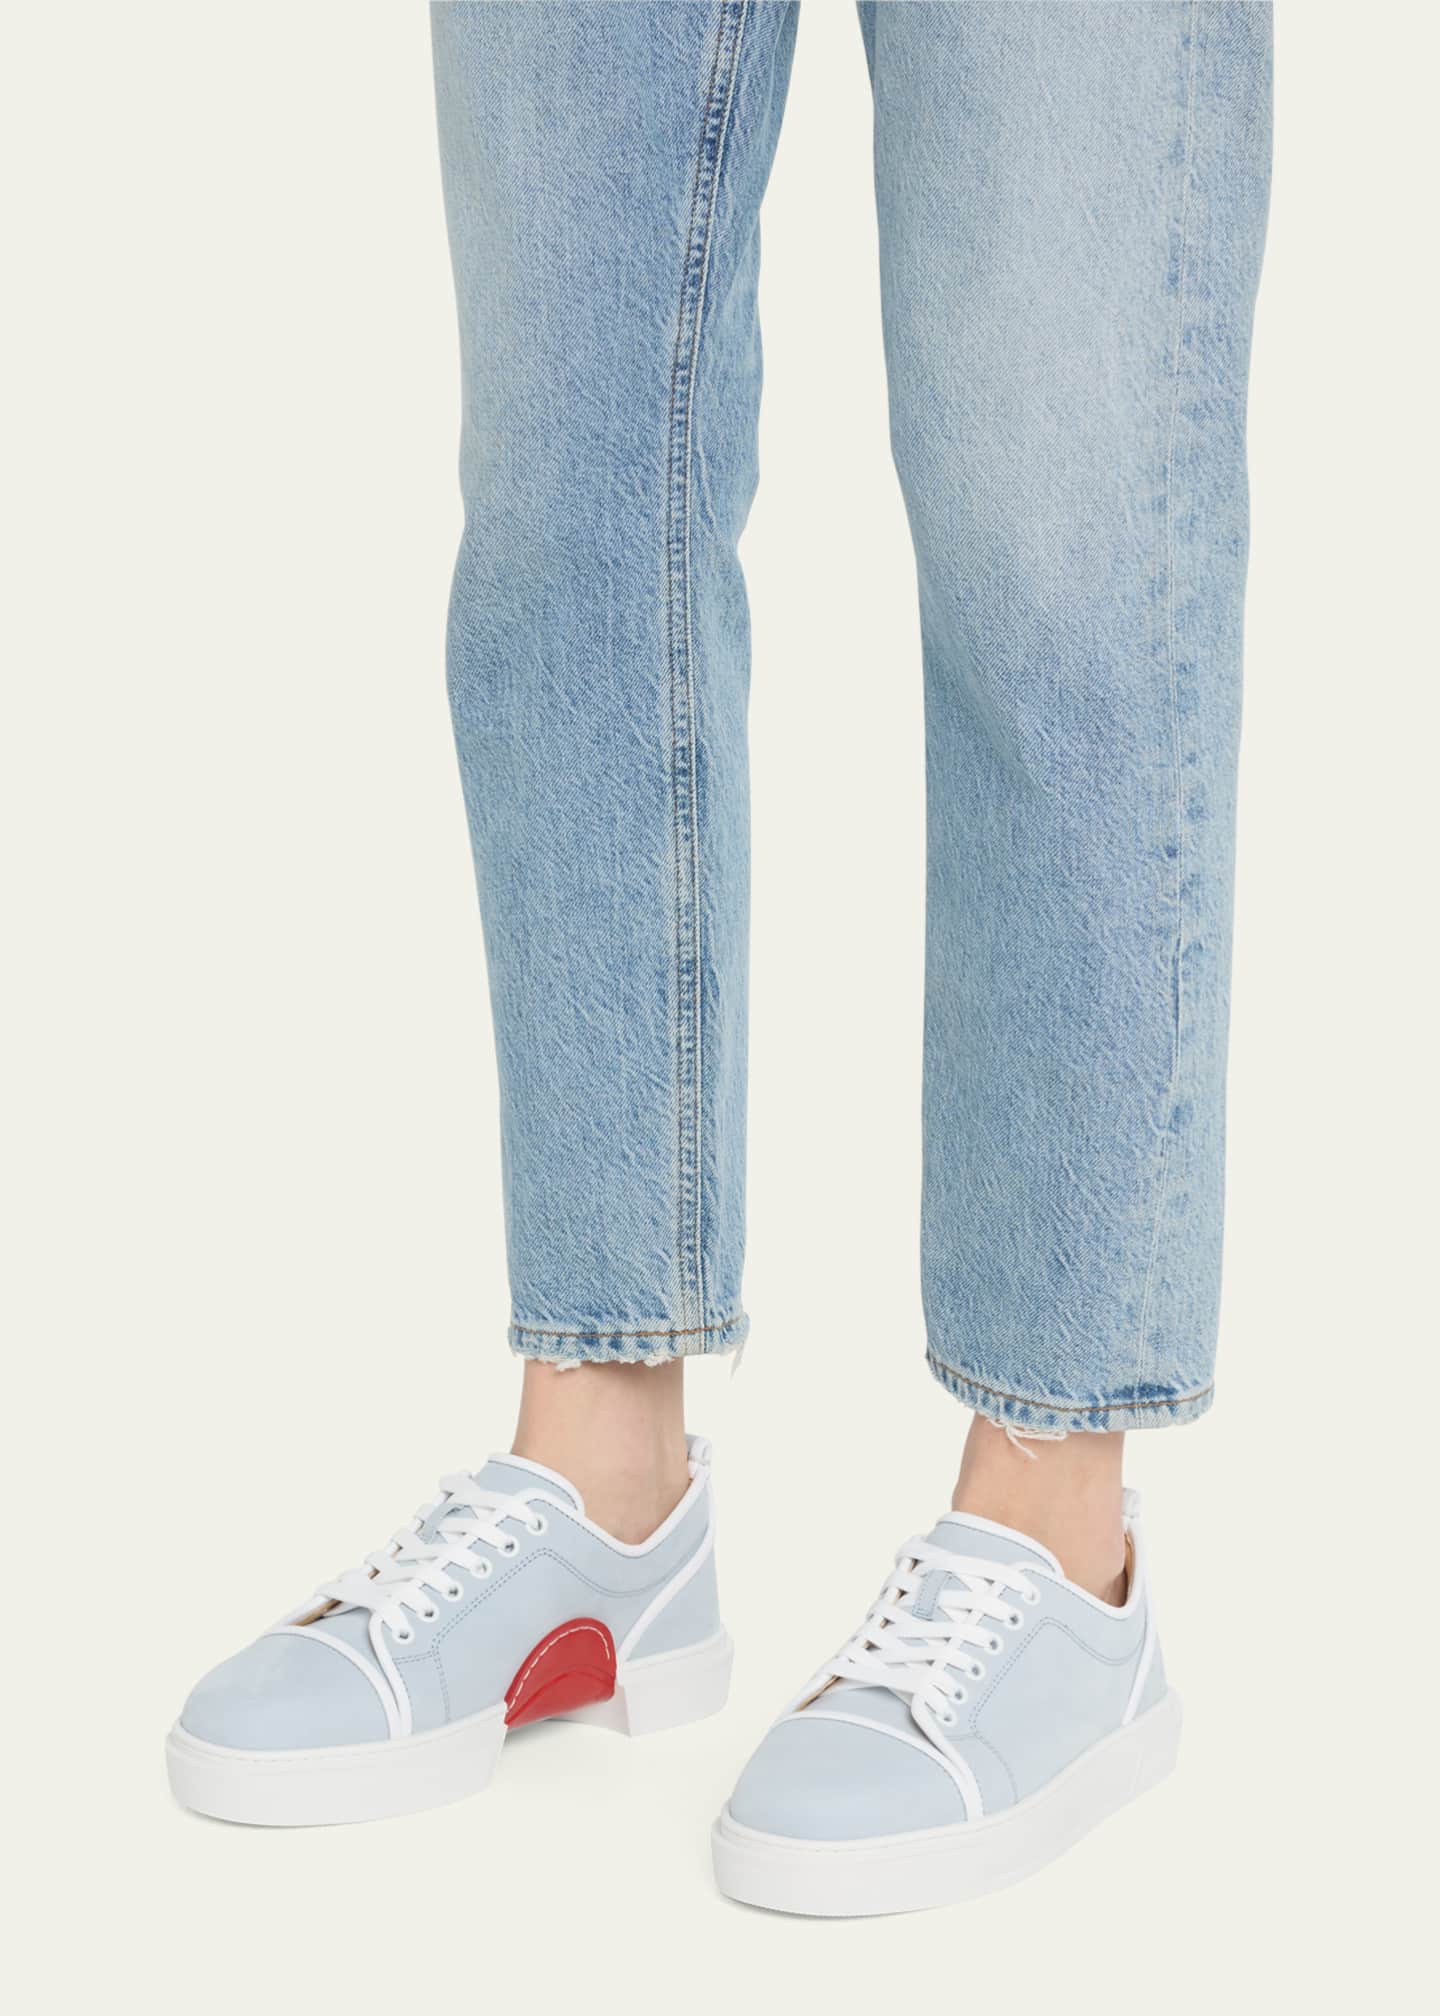 Shop Christian Louboutin Casual Style Street Style Logo Low-Top